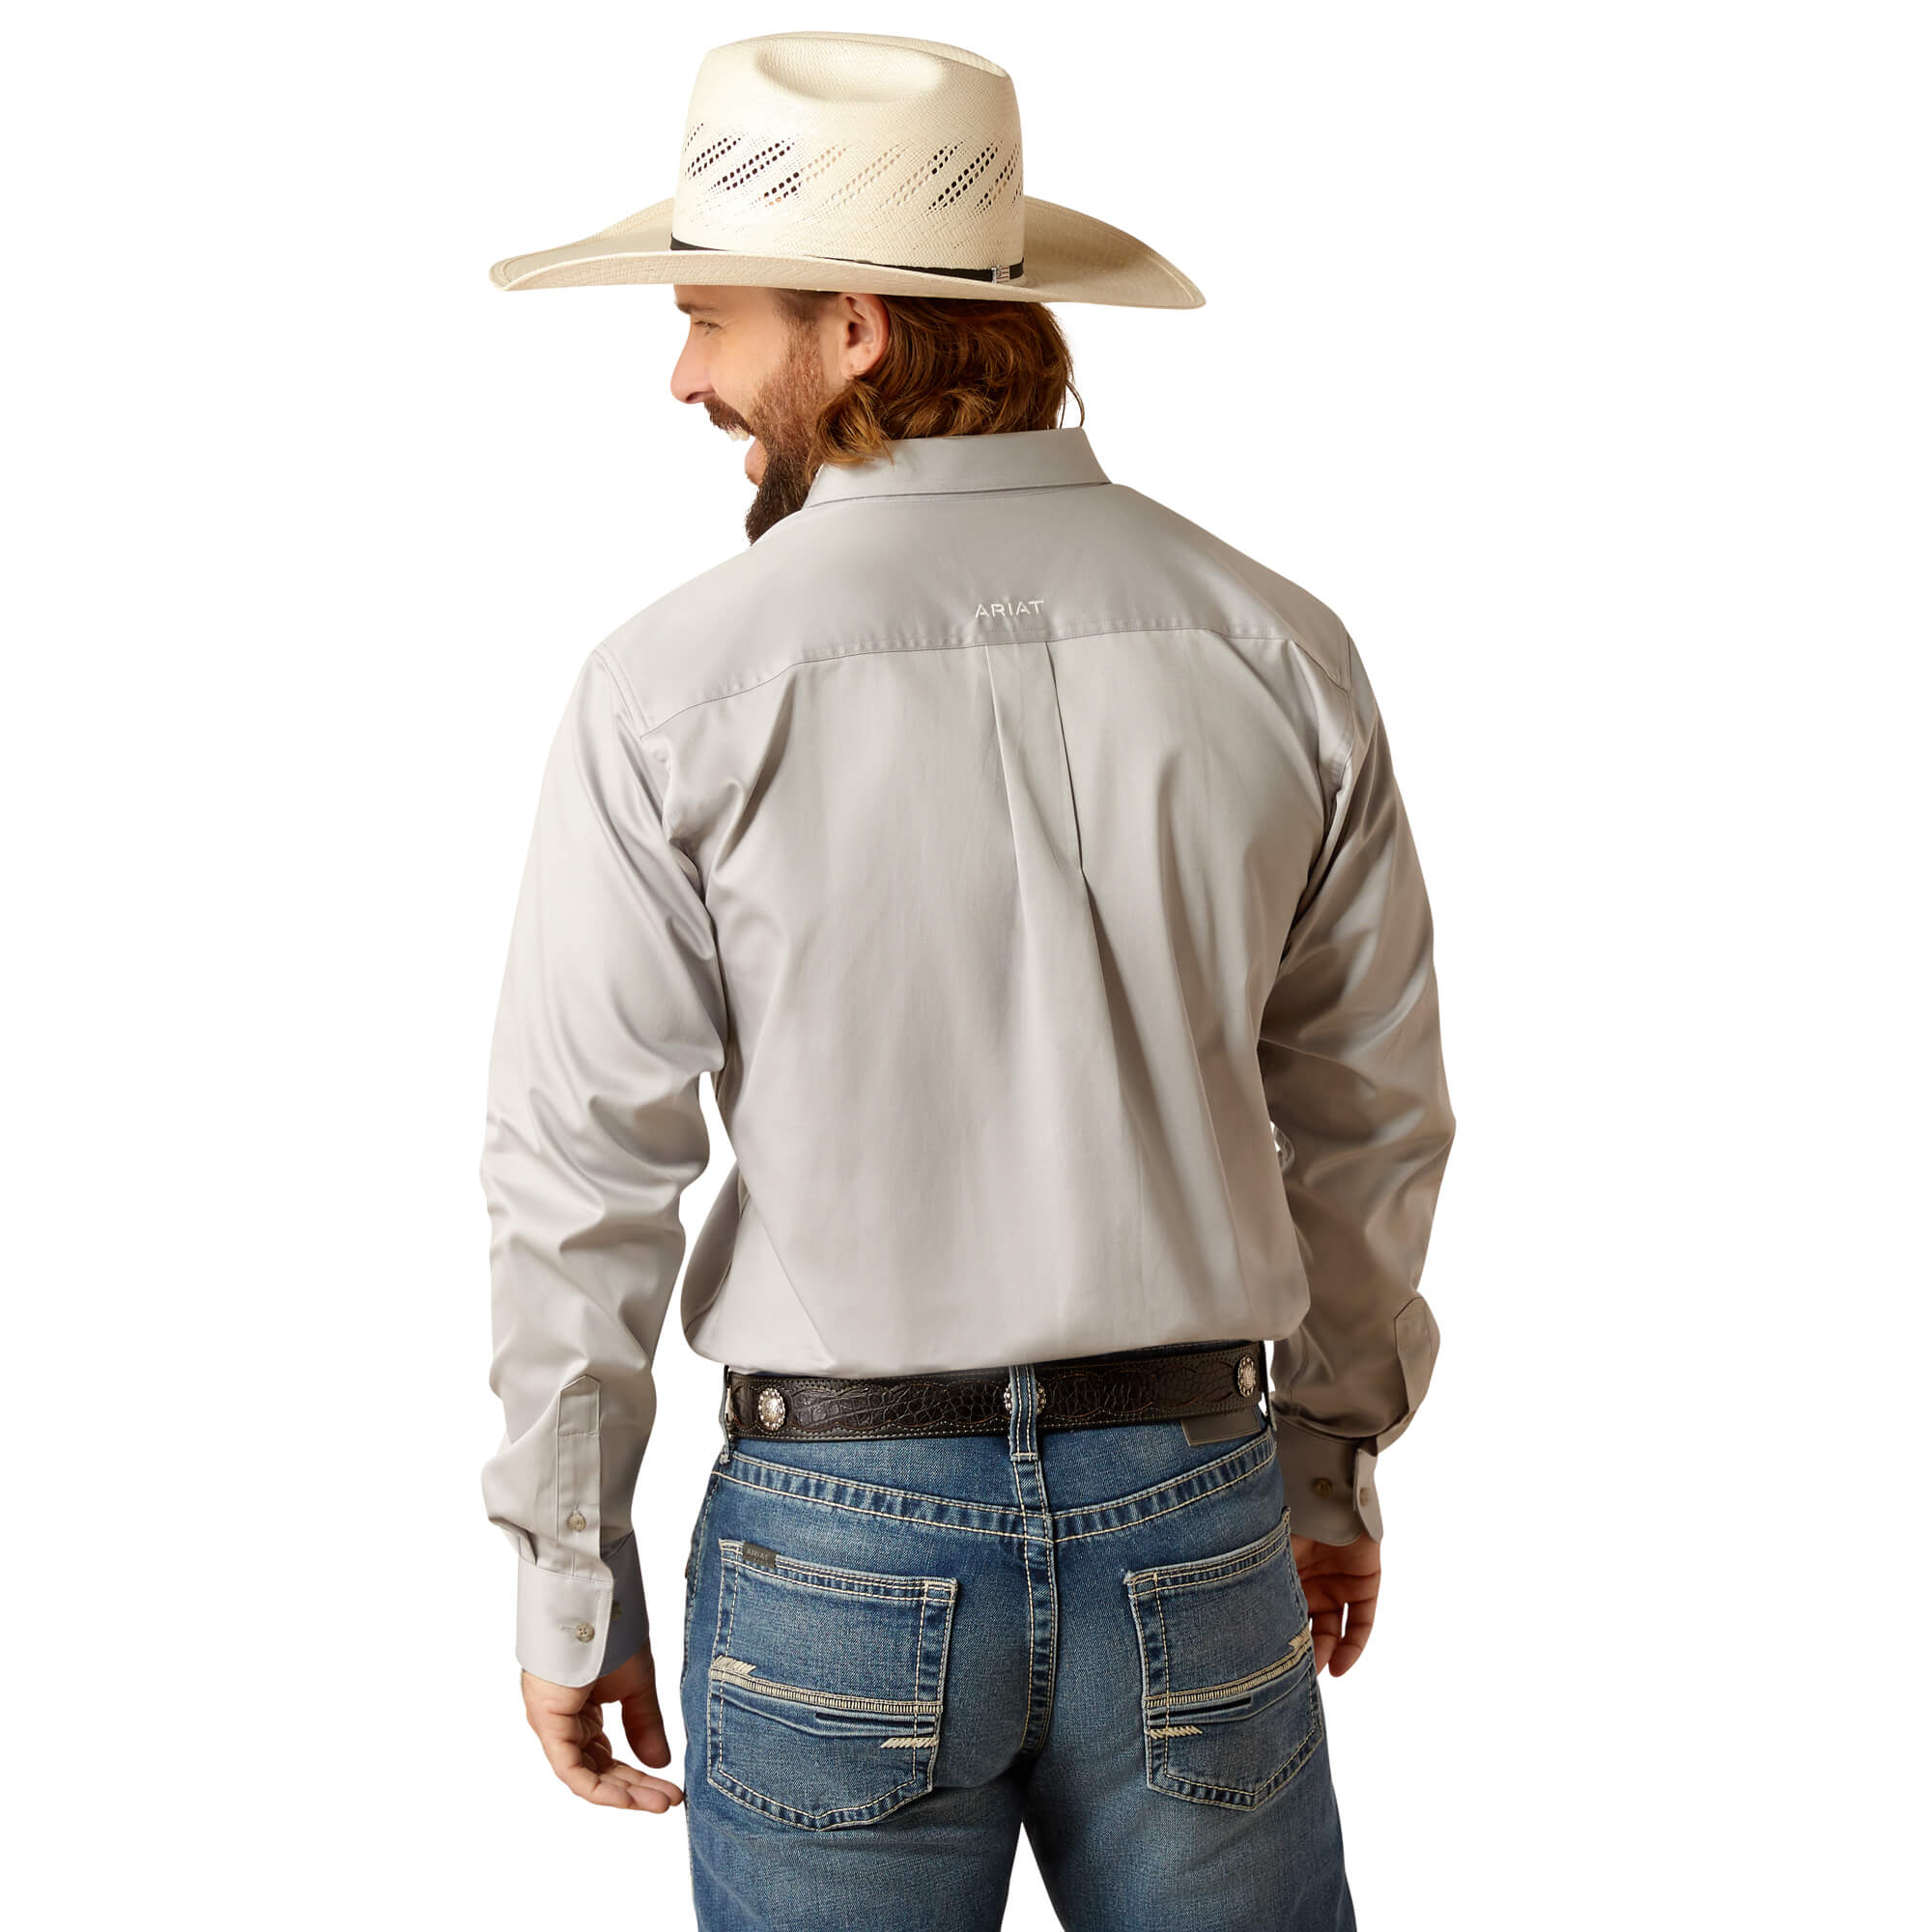 Ariat Team Logo Fitted Shirt in Light Grey Back View